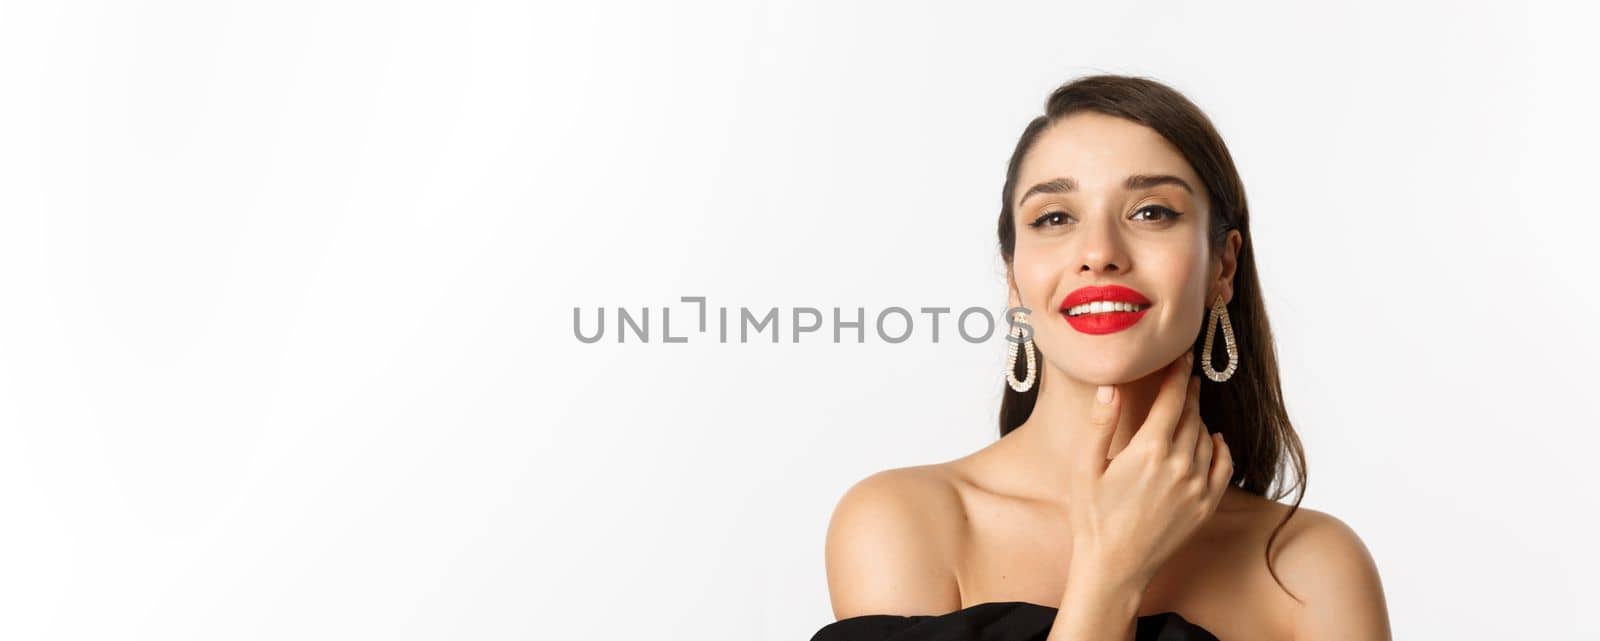 Fashion and beauty concept. Close-up of gorgeous brunette woman with red lips, touching face and smiling self-assured, standing over white background.